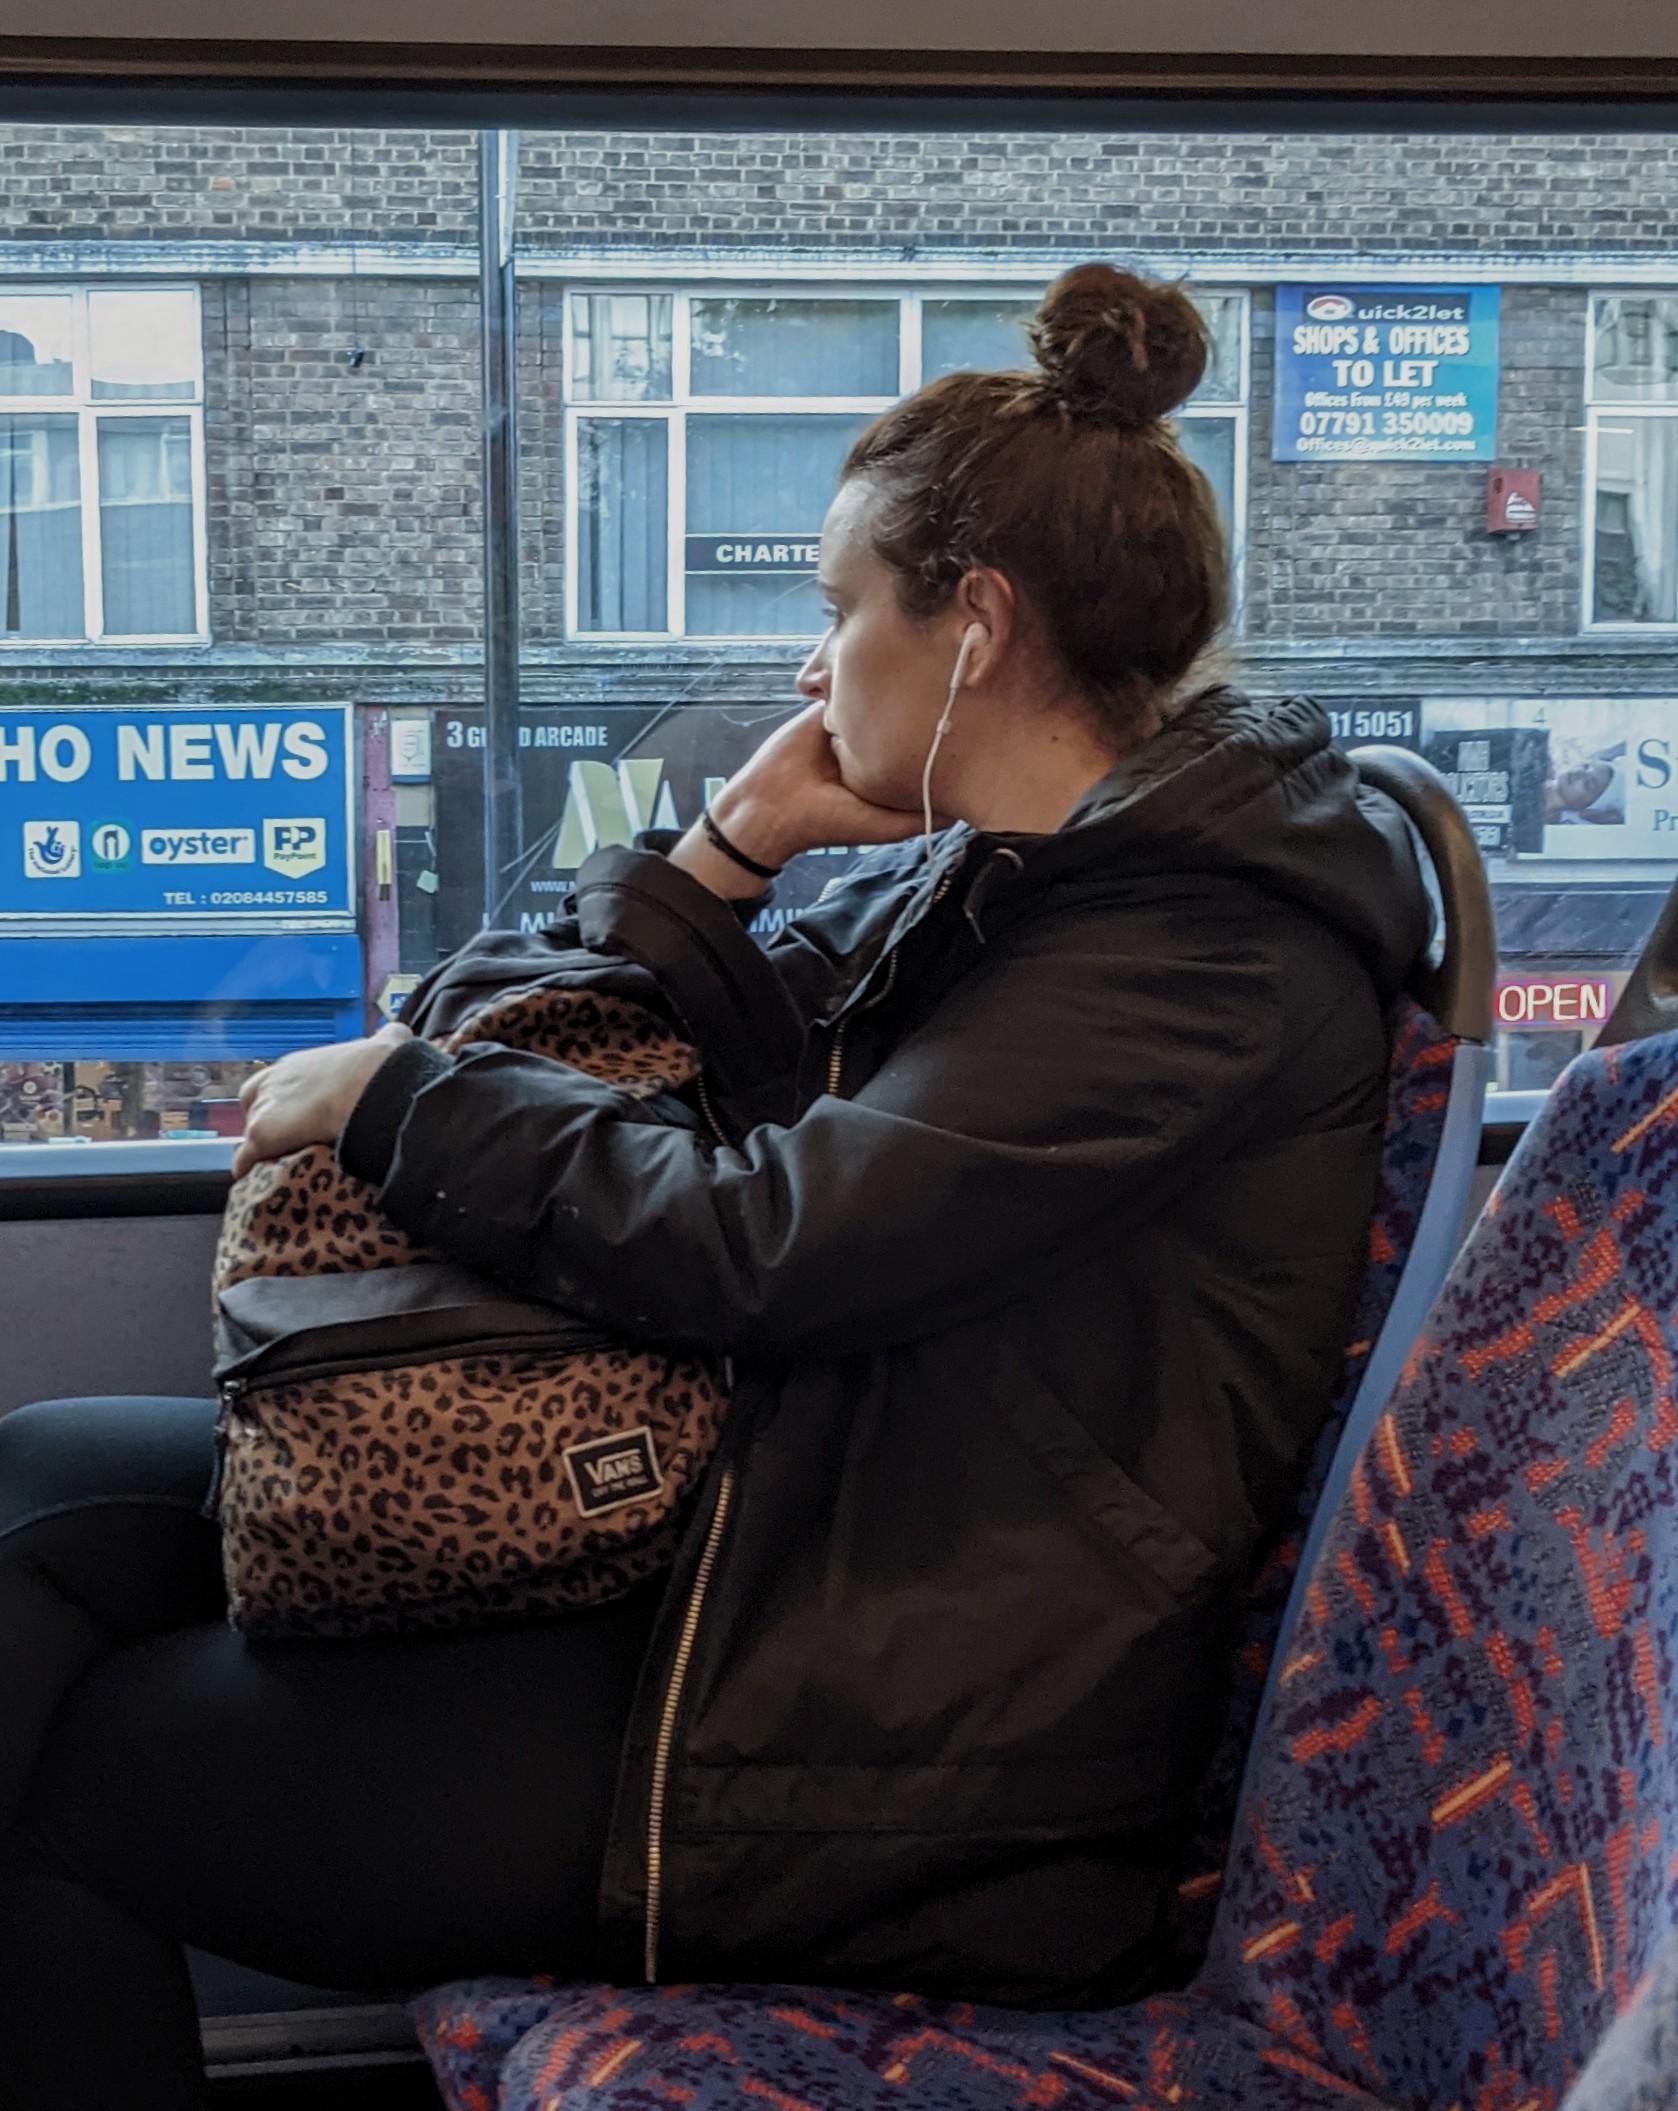 A photographic image of a woman looking out the window of a bus, with her face resting on her palm